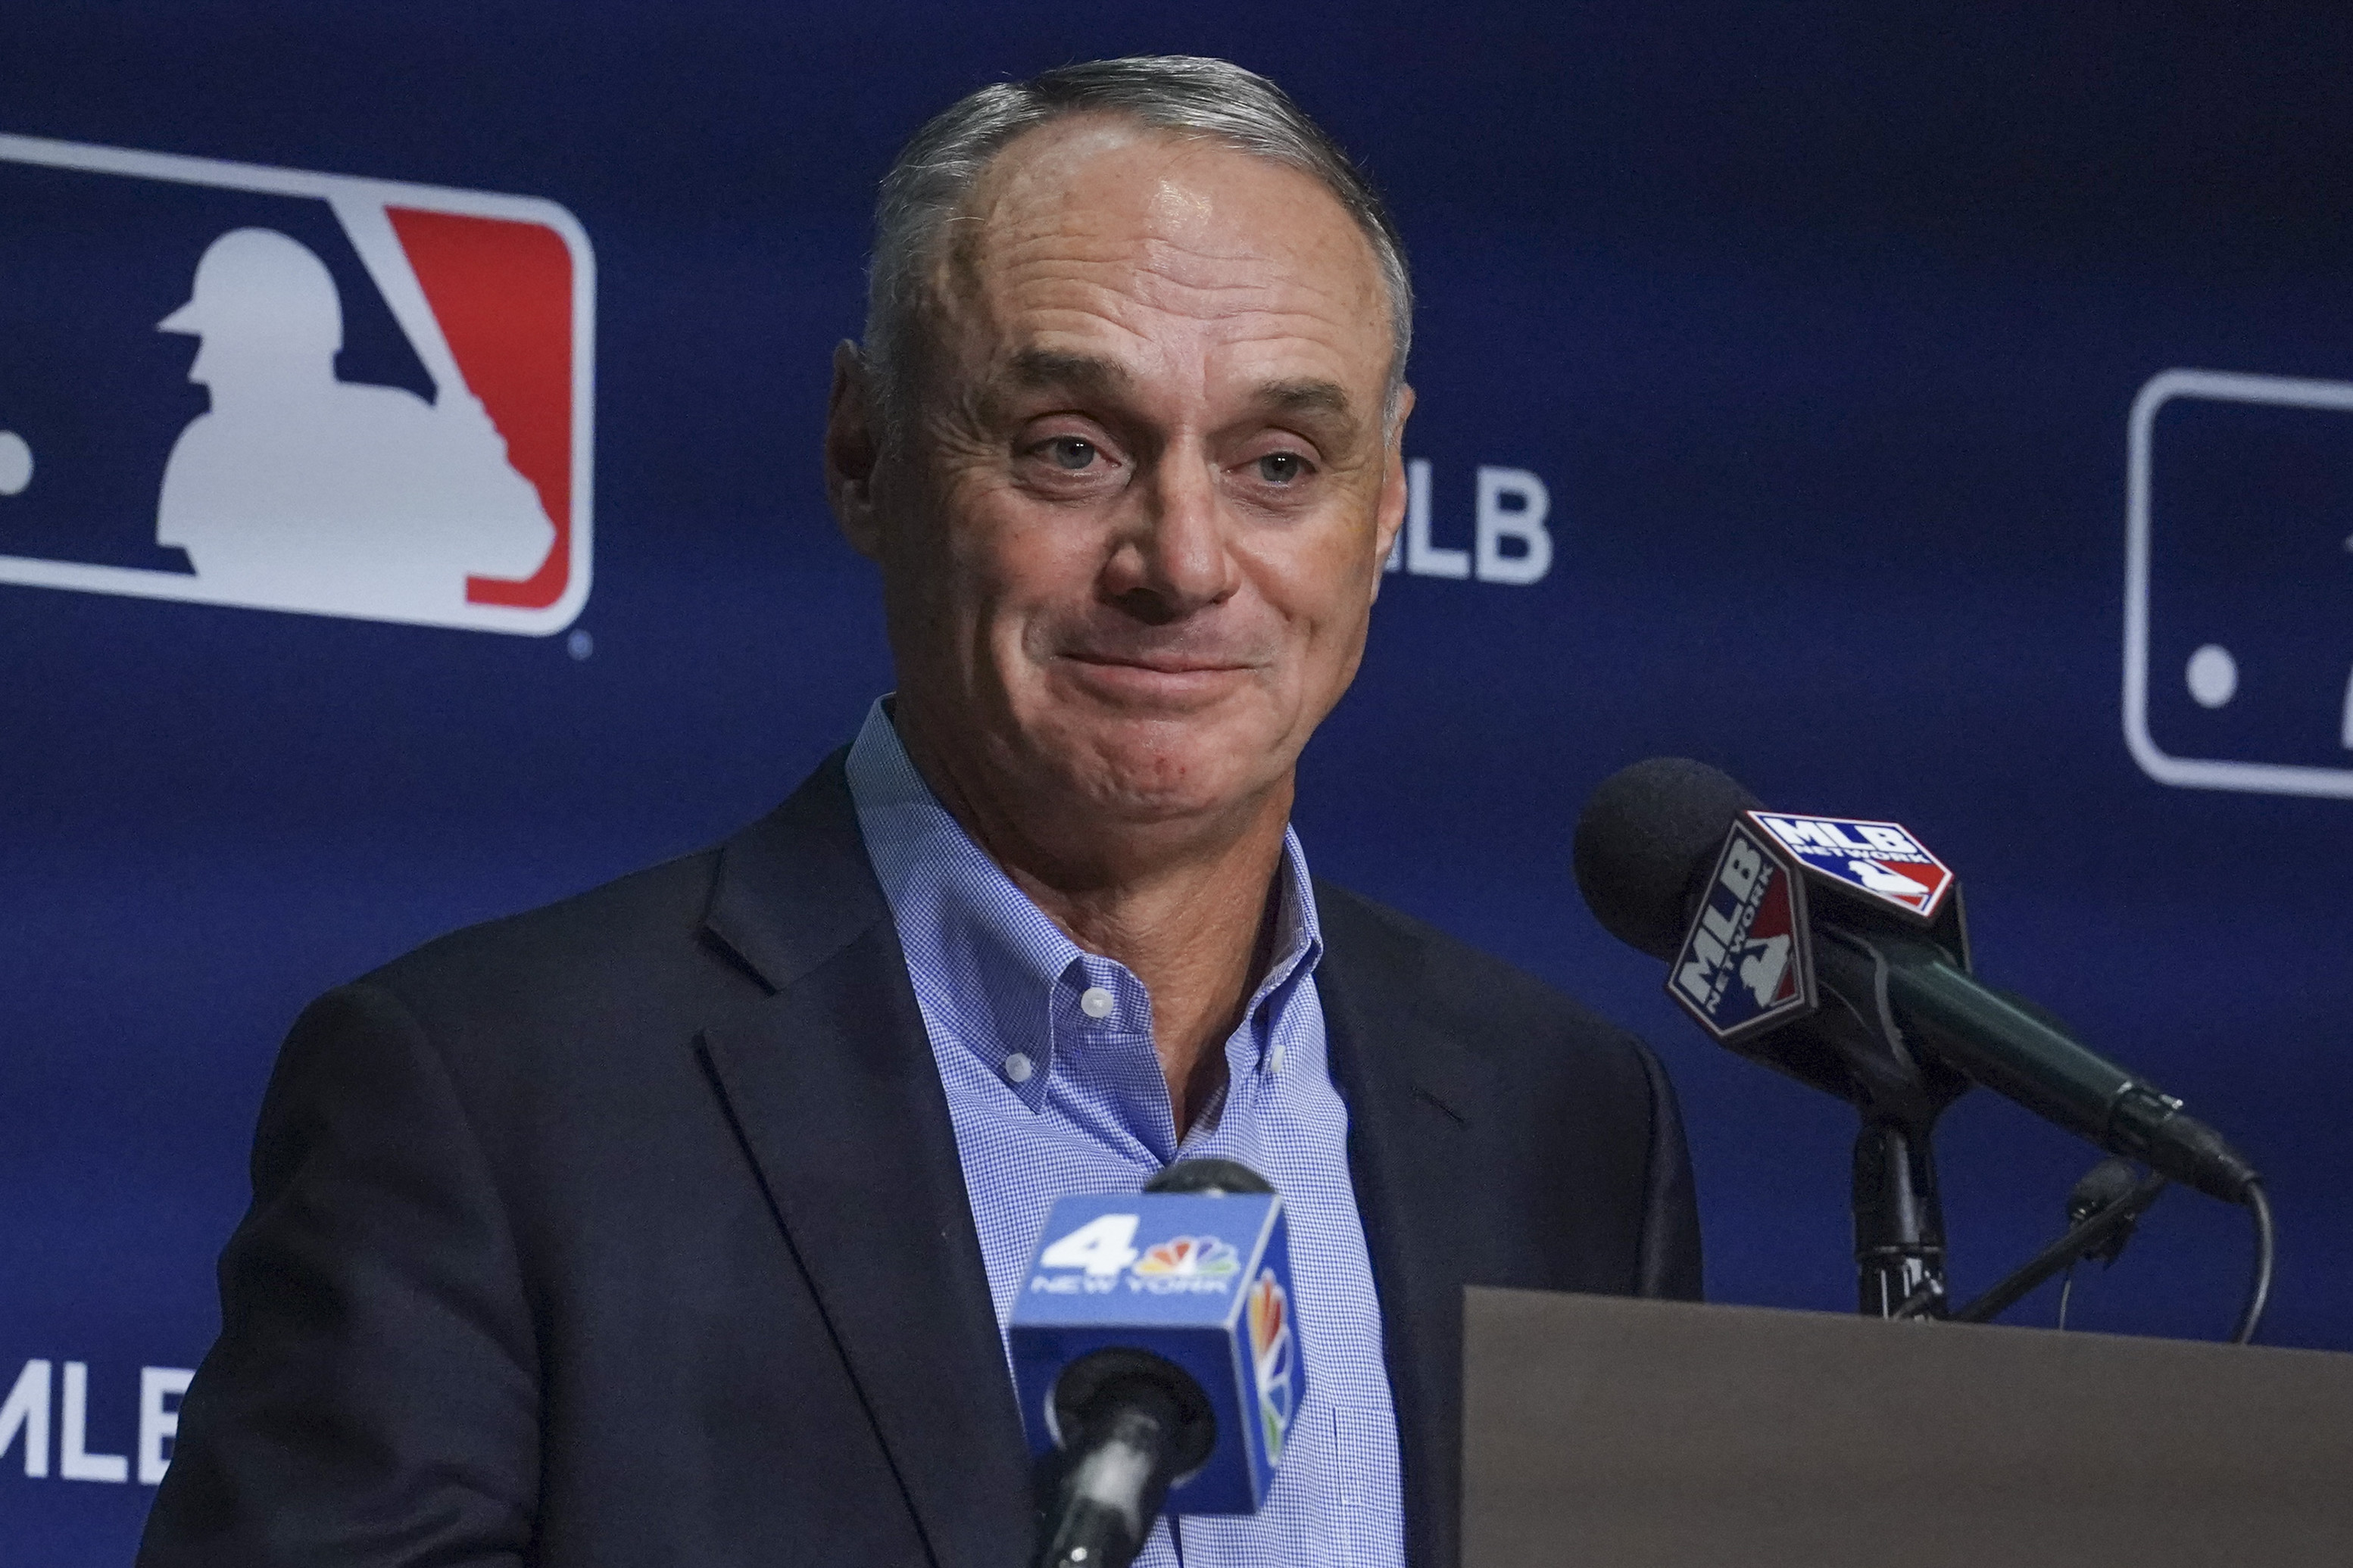 Rob Manfred Gifted Each MLB Player Bose Headphones and Wrote a Letter of Appreci..